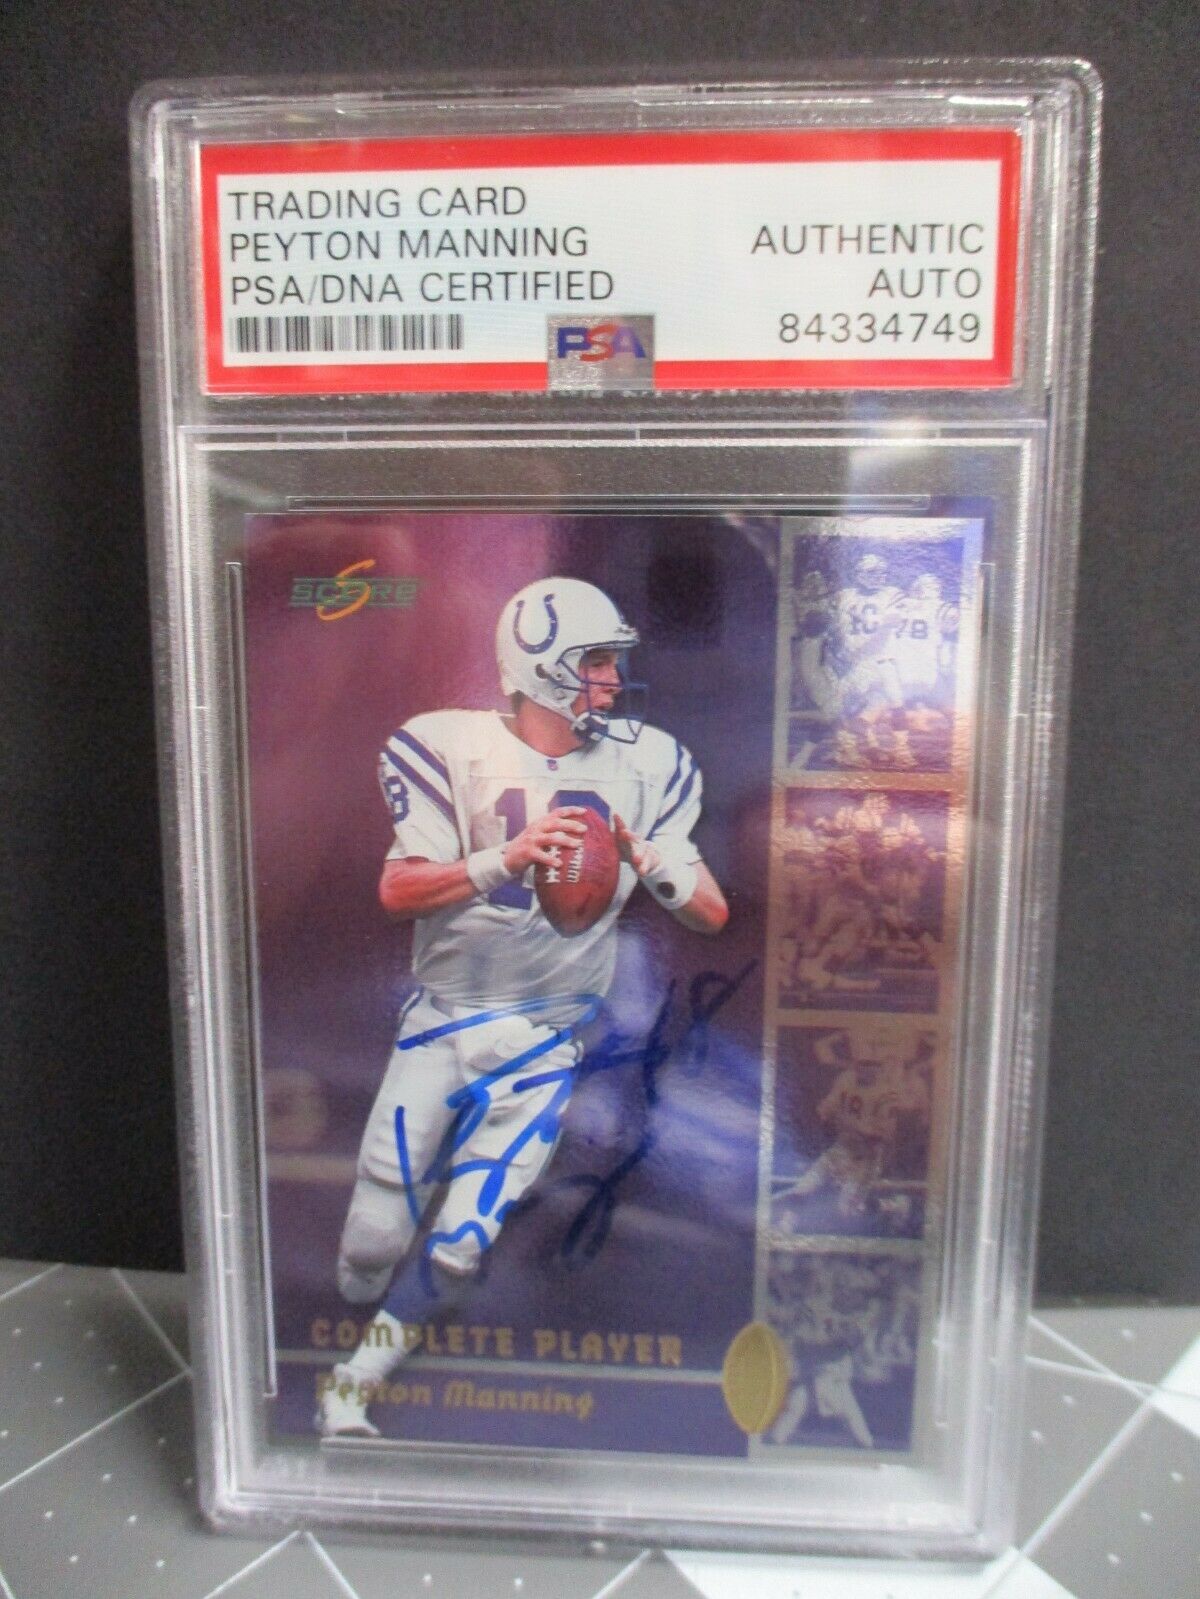 1999 Score Complete Player Peyton Manning Autographed Card